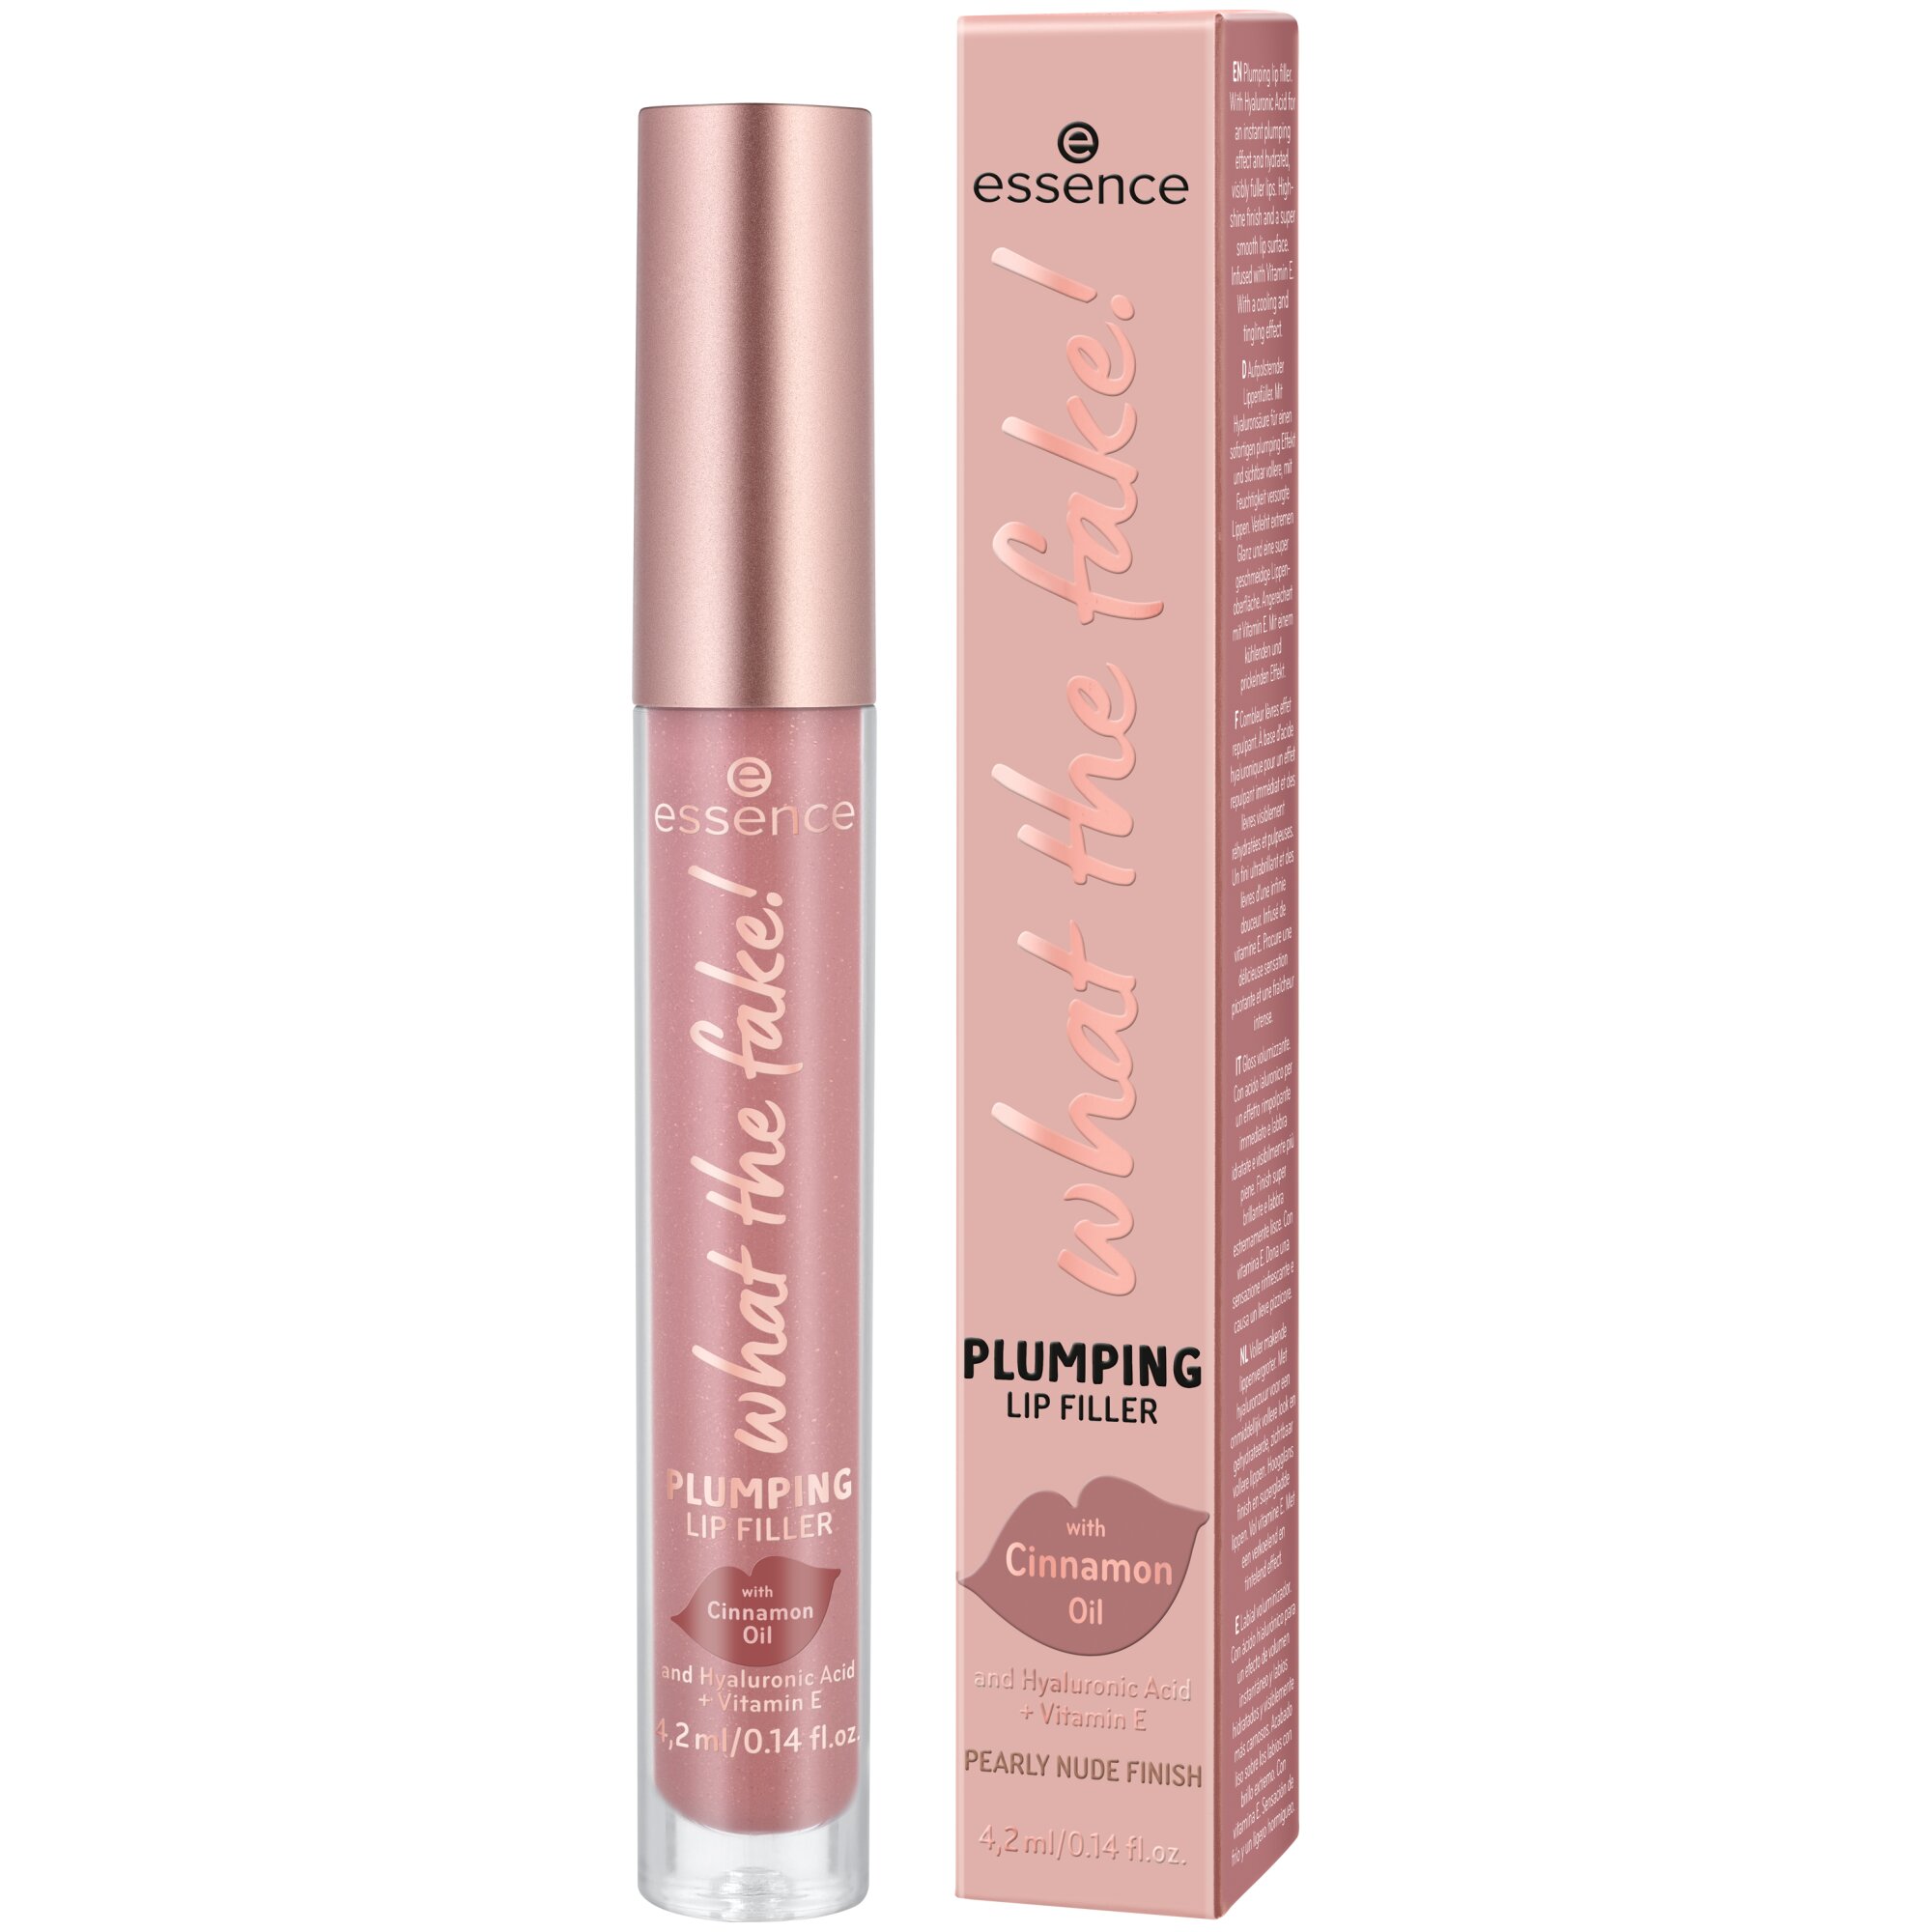 Luciu de buze Extreme Plumping Lip Filler What the fake!, 2 - oh my nude!, 4.2 ml, Essence